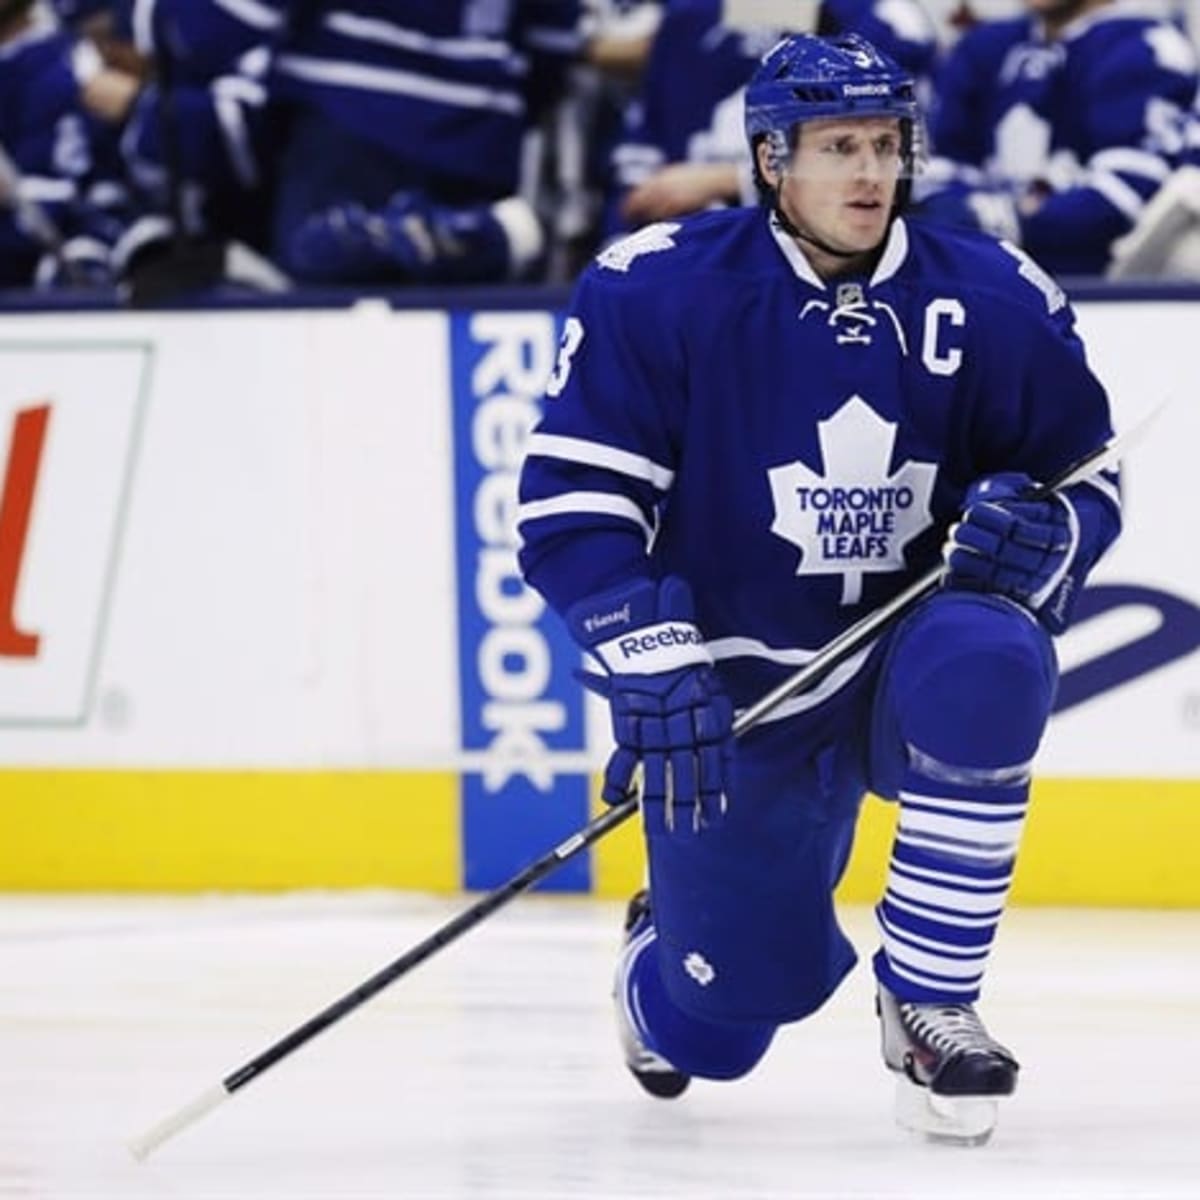 Maple Leafs are happy to move on from HBO's '24/7